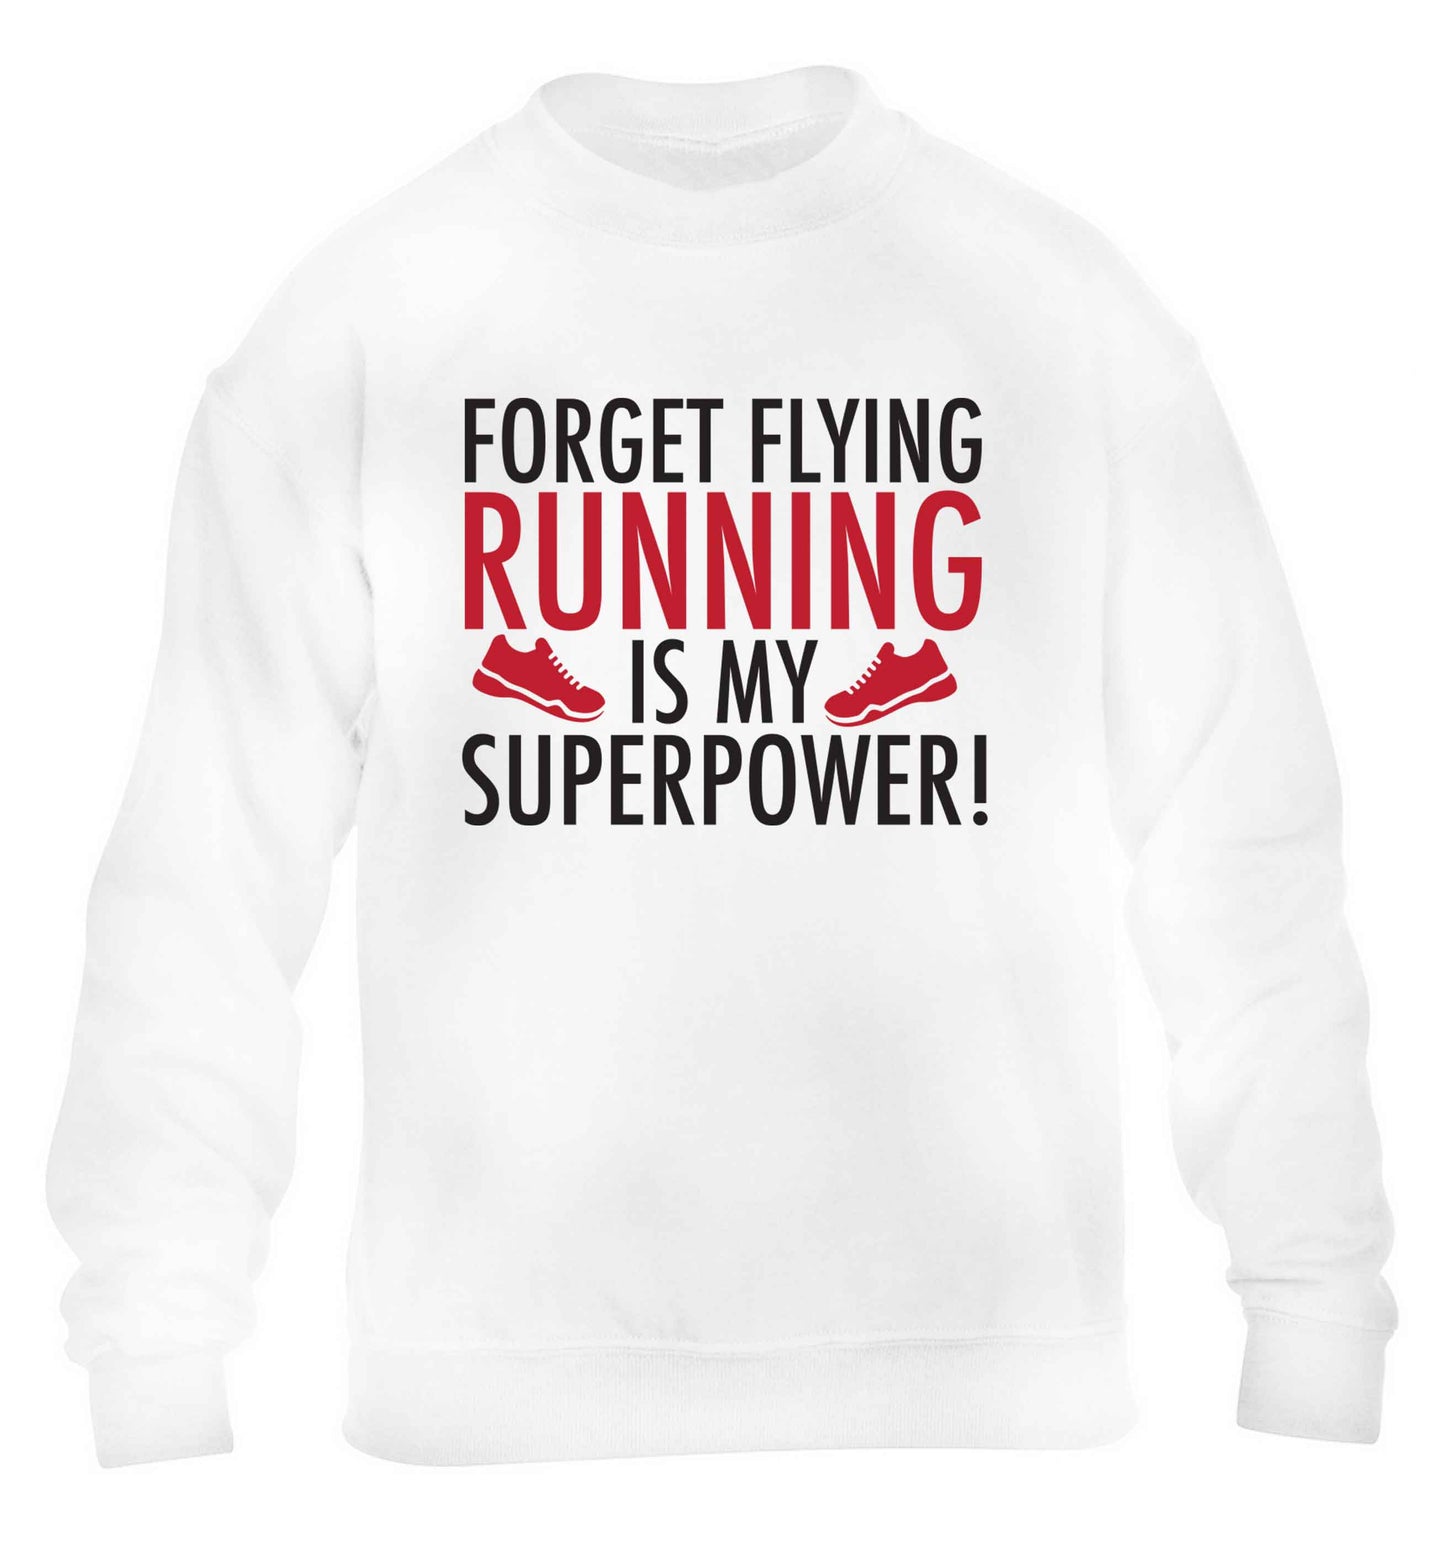 Forget flying running is my superpower children's white sweater 12-13 Years